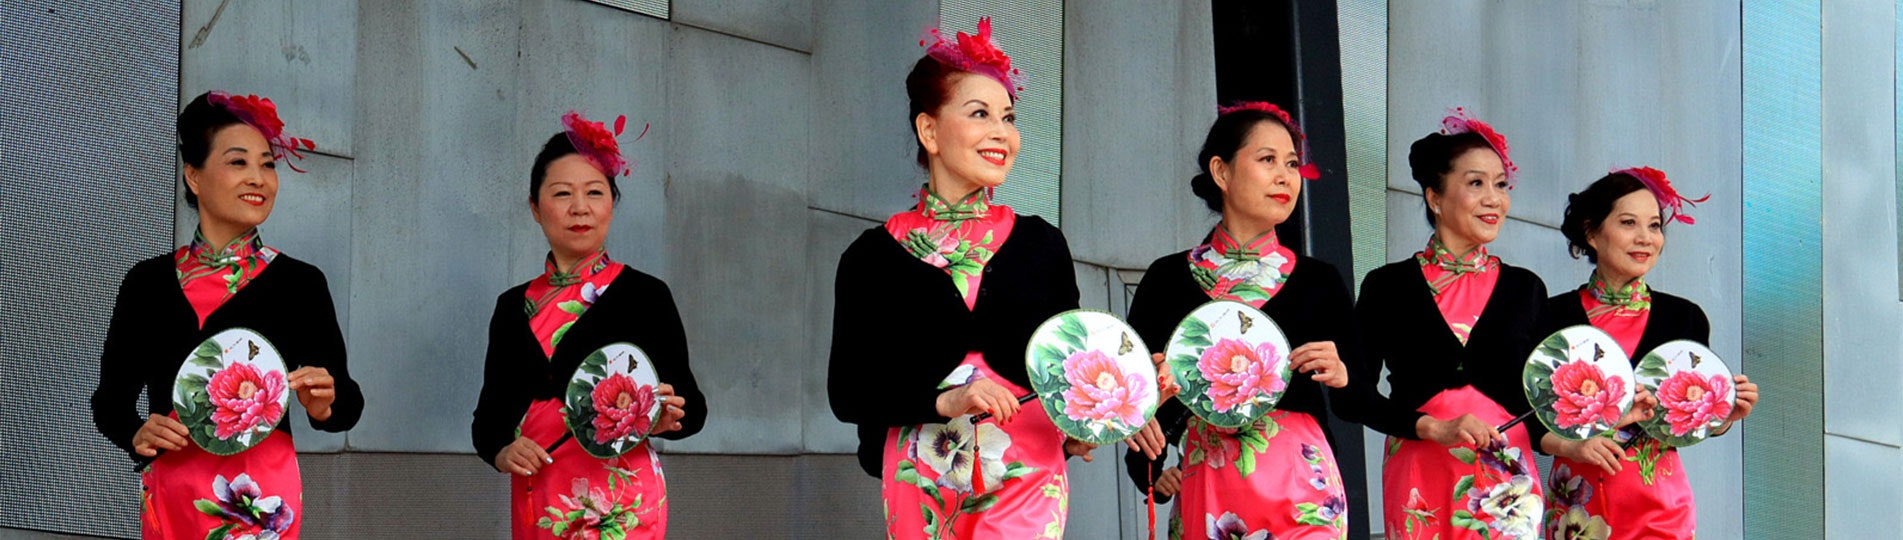 Six Chinese women dressed in traditonal clothing on stage at Fed Square dancing